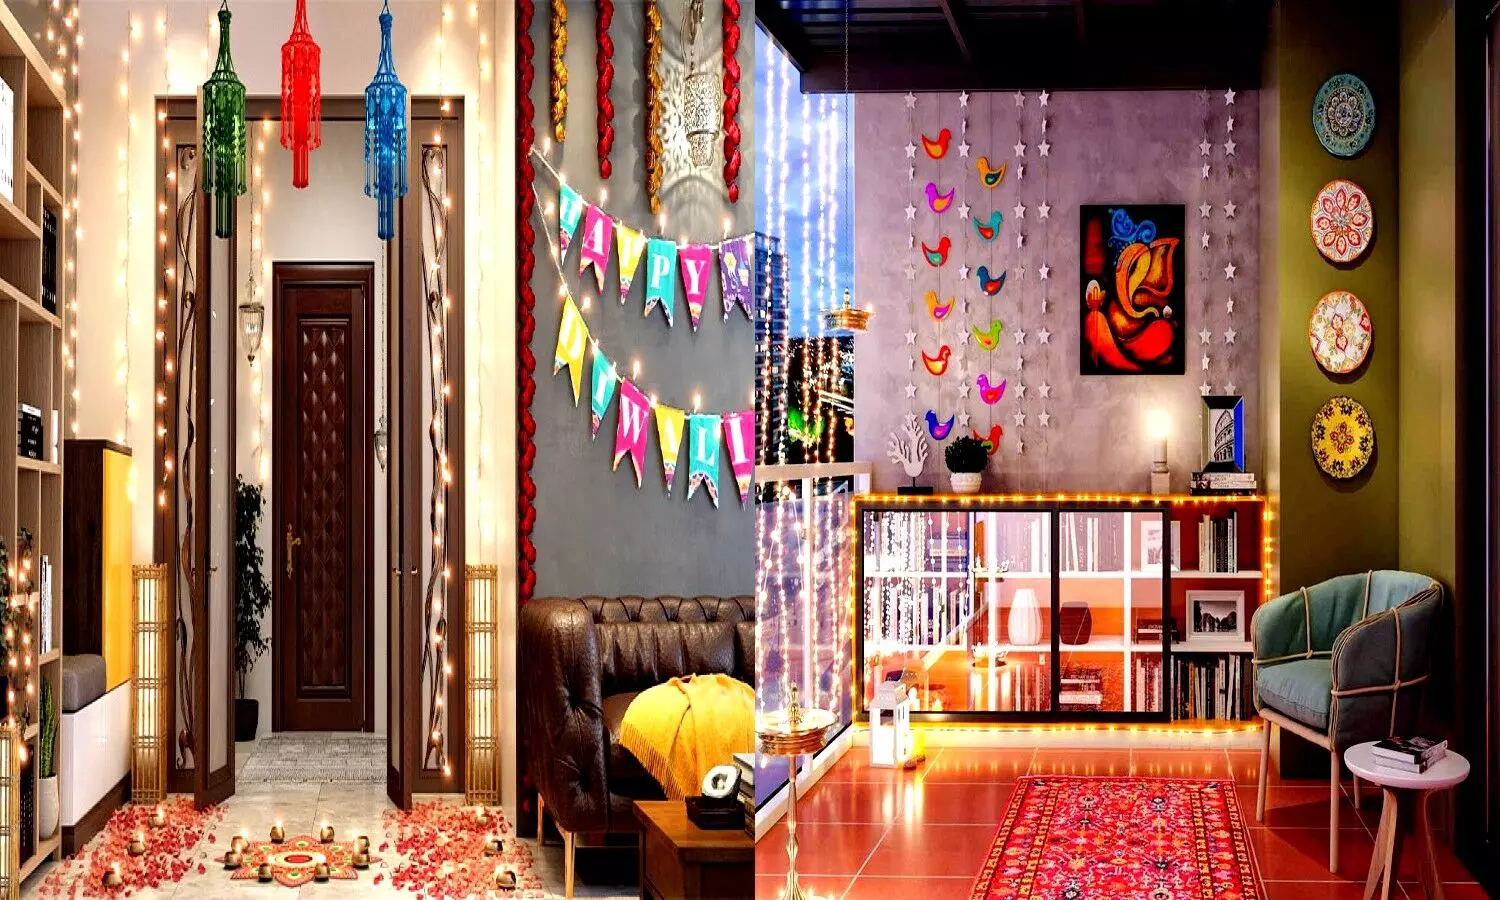 Decorate the house like this on Diwali